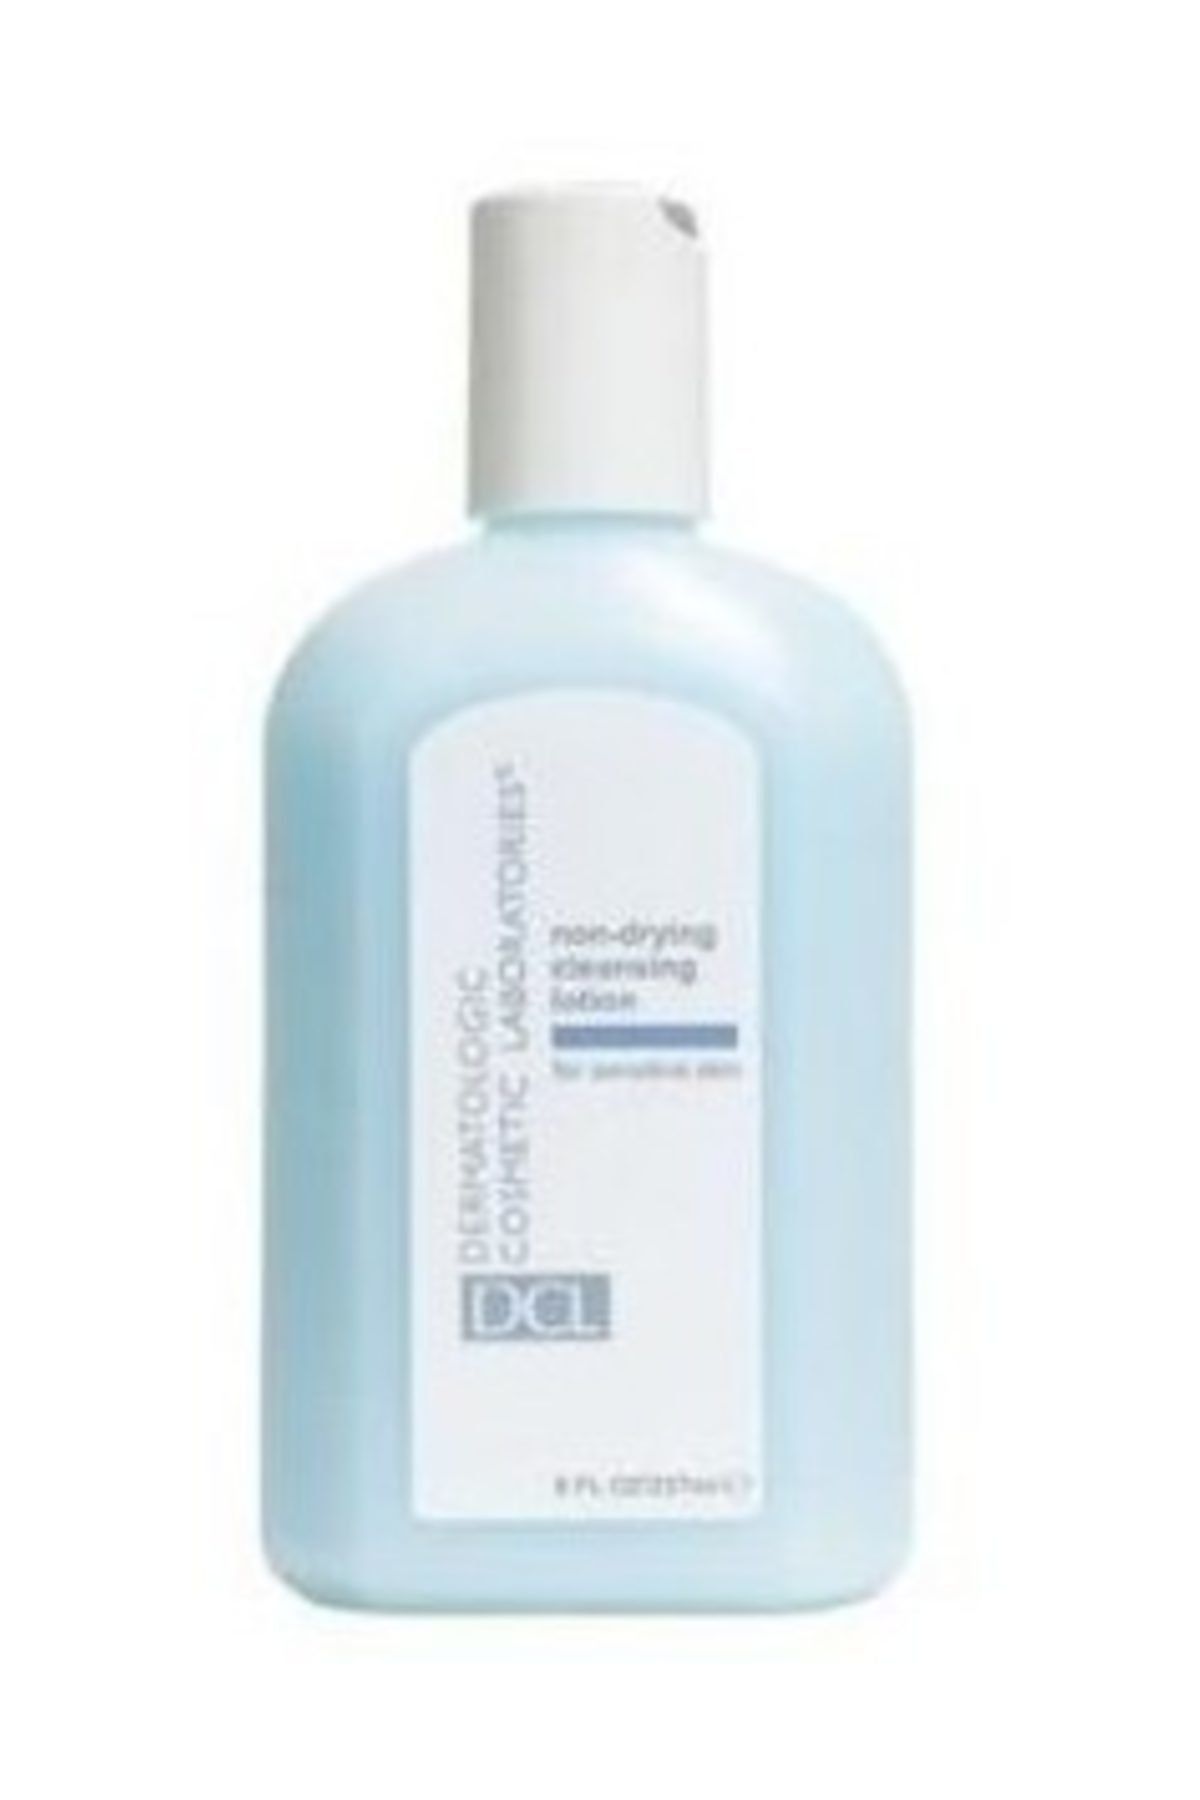 DCL Non-drying Cleansing Lotion 237 ml.